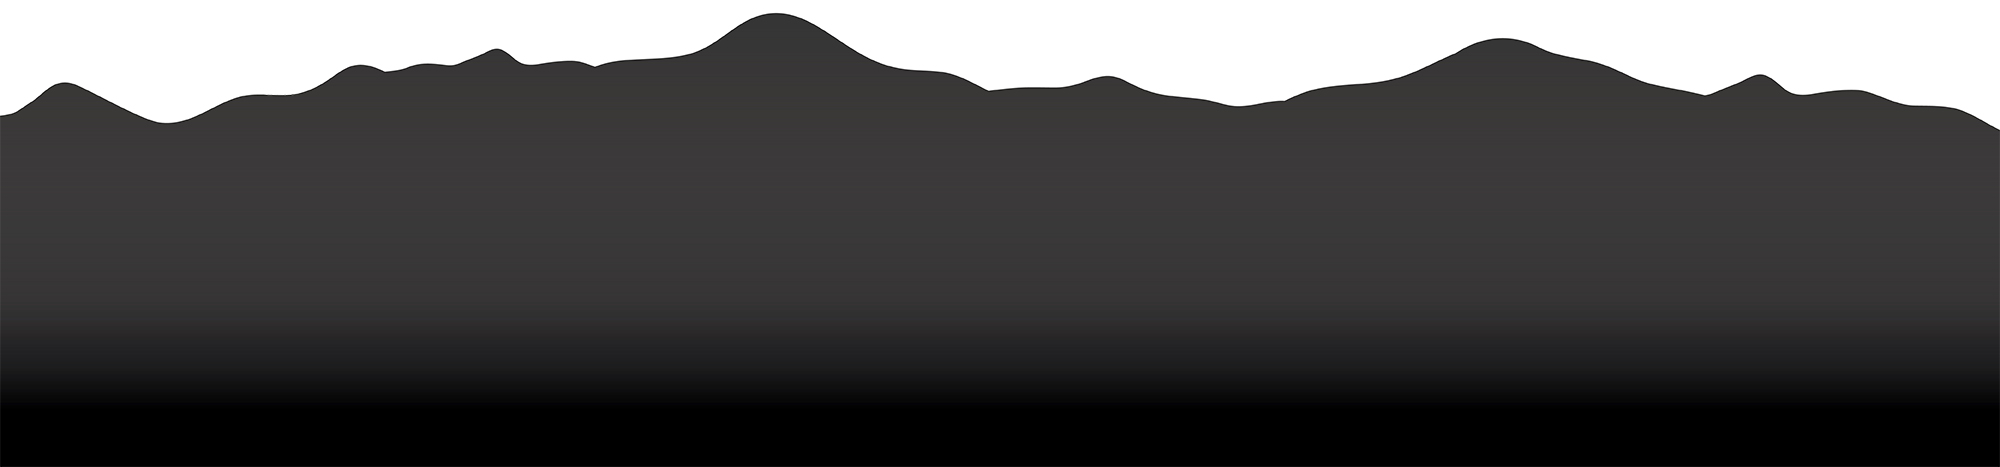 Footer Background - a silhouette of hills